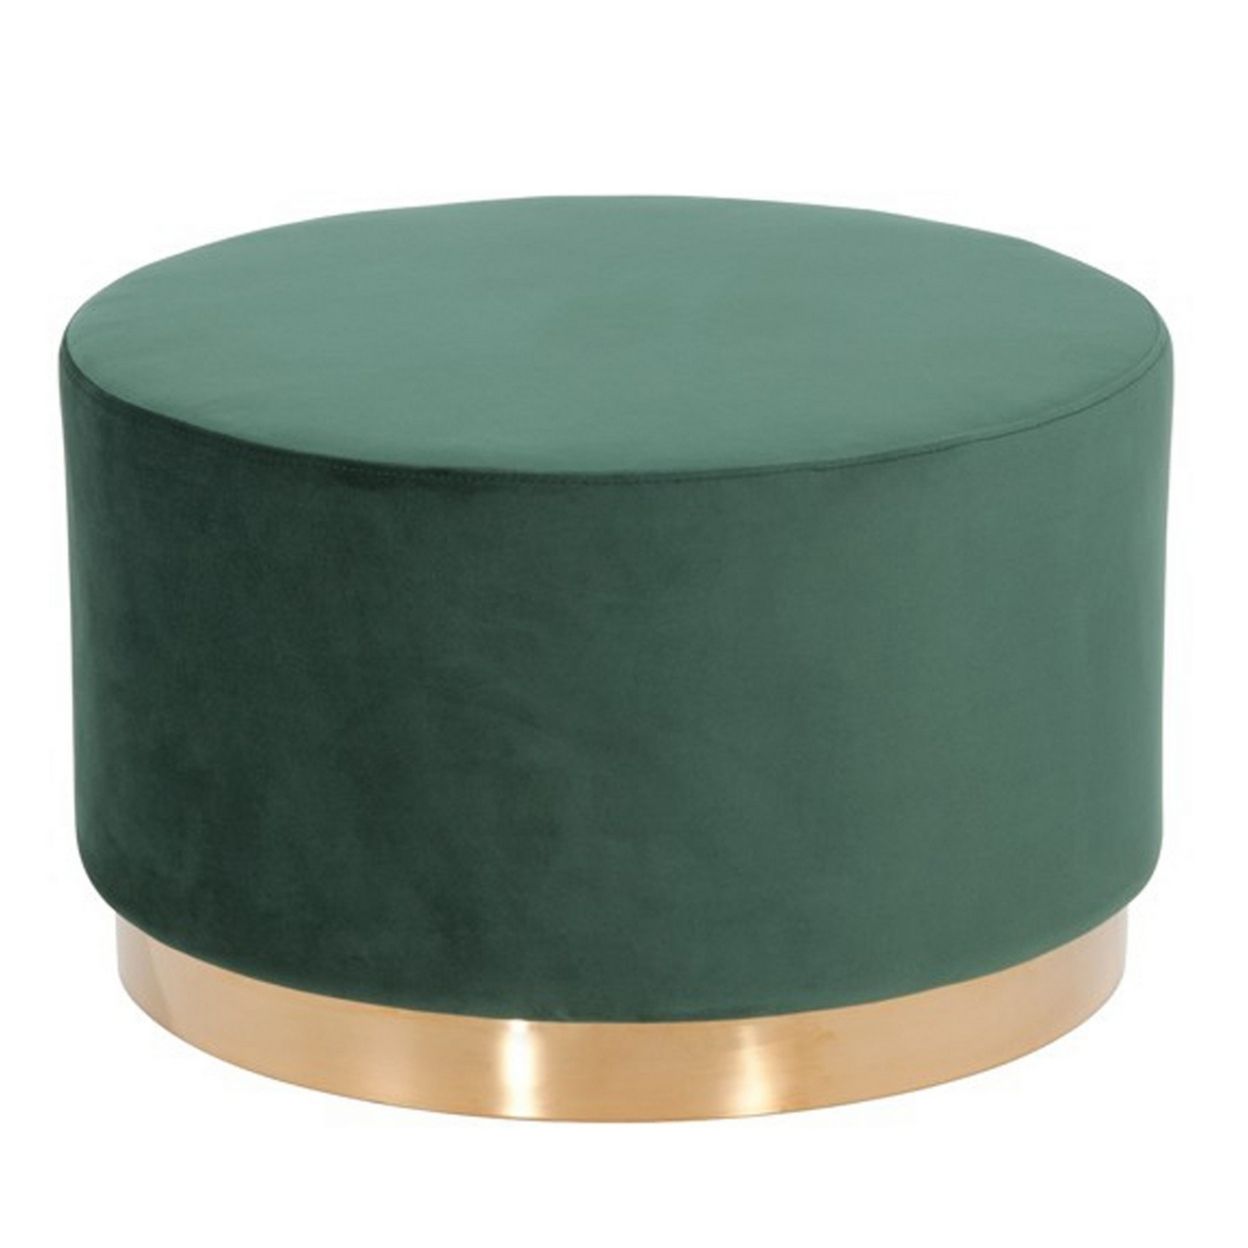 Velvet Upholstered Ottoman With Steel Base, Small, Green And Gold | Ebay With Regard To Honeycomb Cream Velvet Fabric And Gold Metal Ottomans (View 7 of 20)